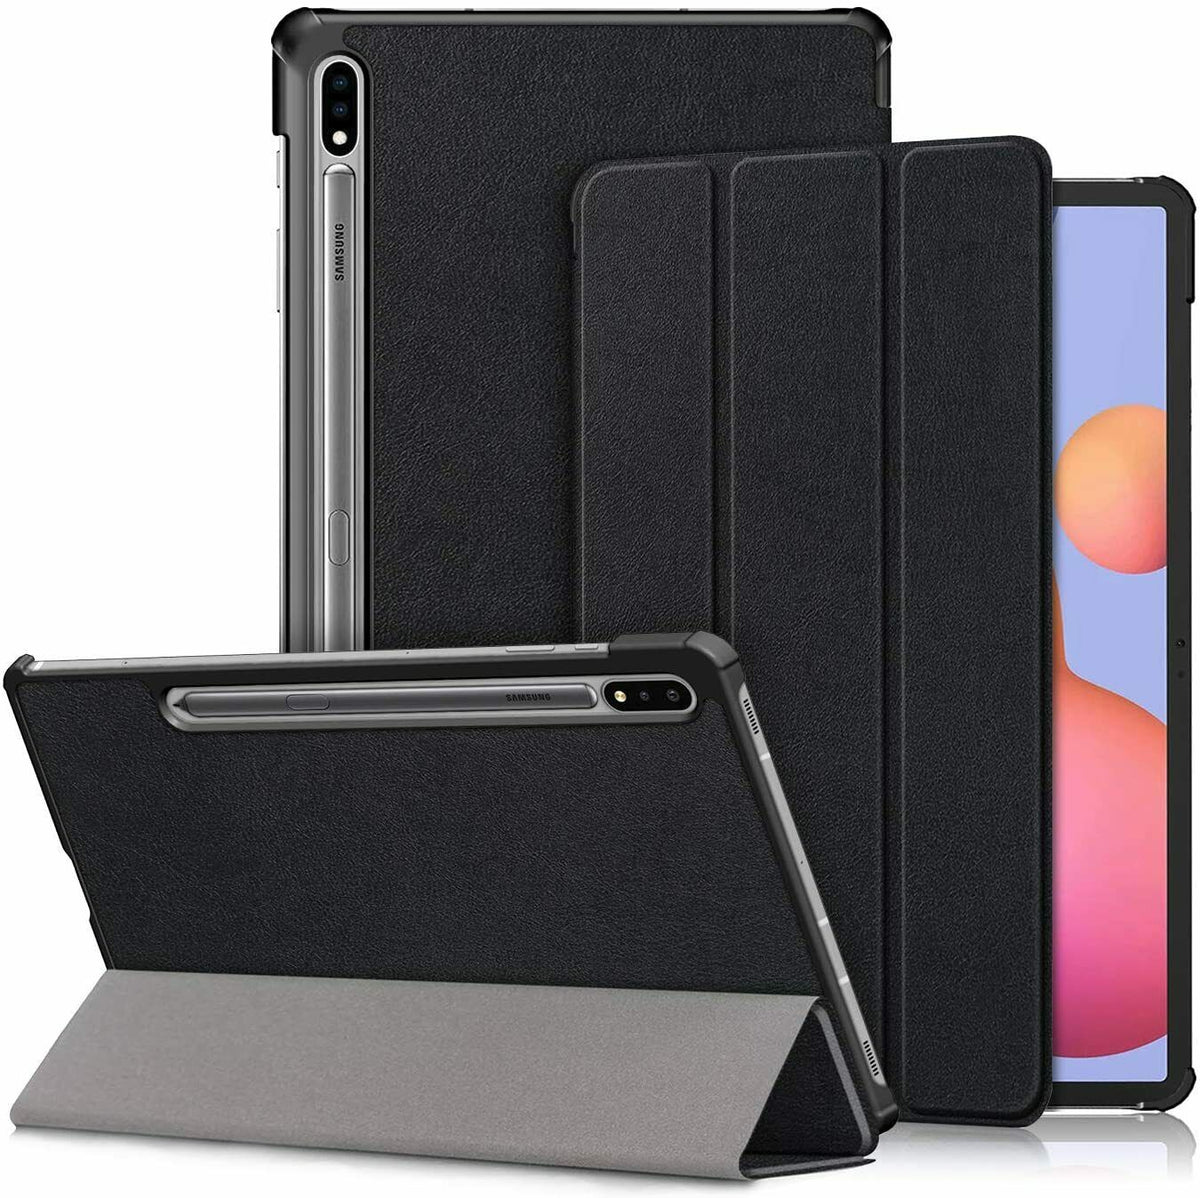 Samsung tab A 10.1” T510/t515 Case Premium Smart Book Stand Cover